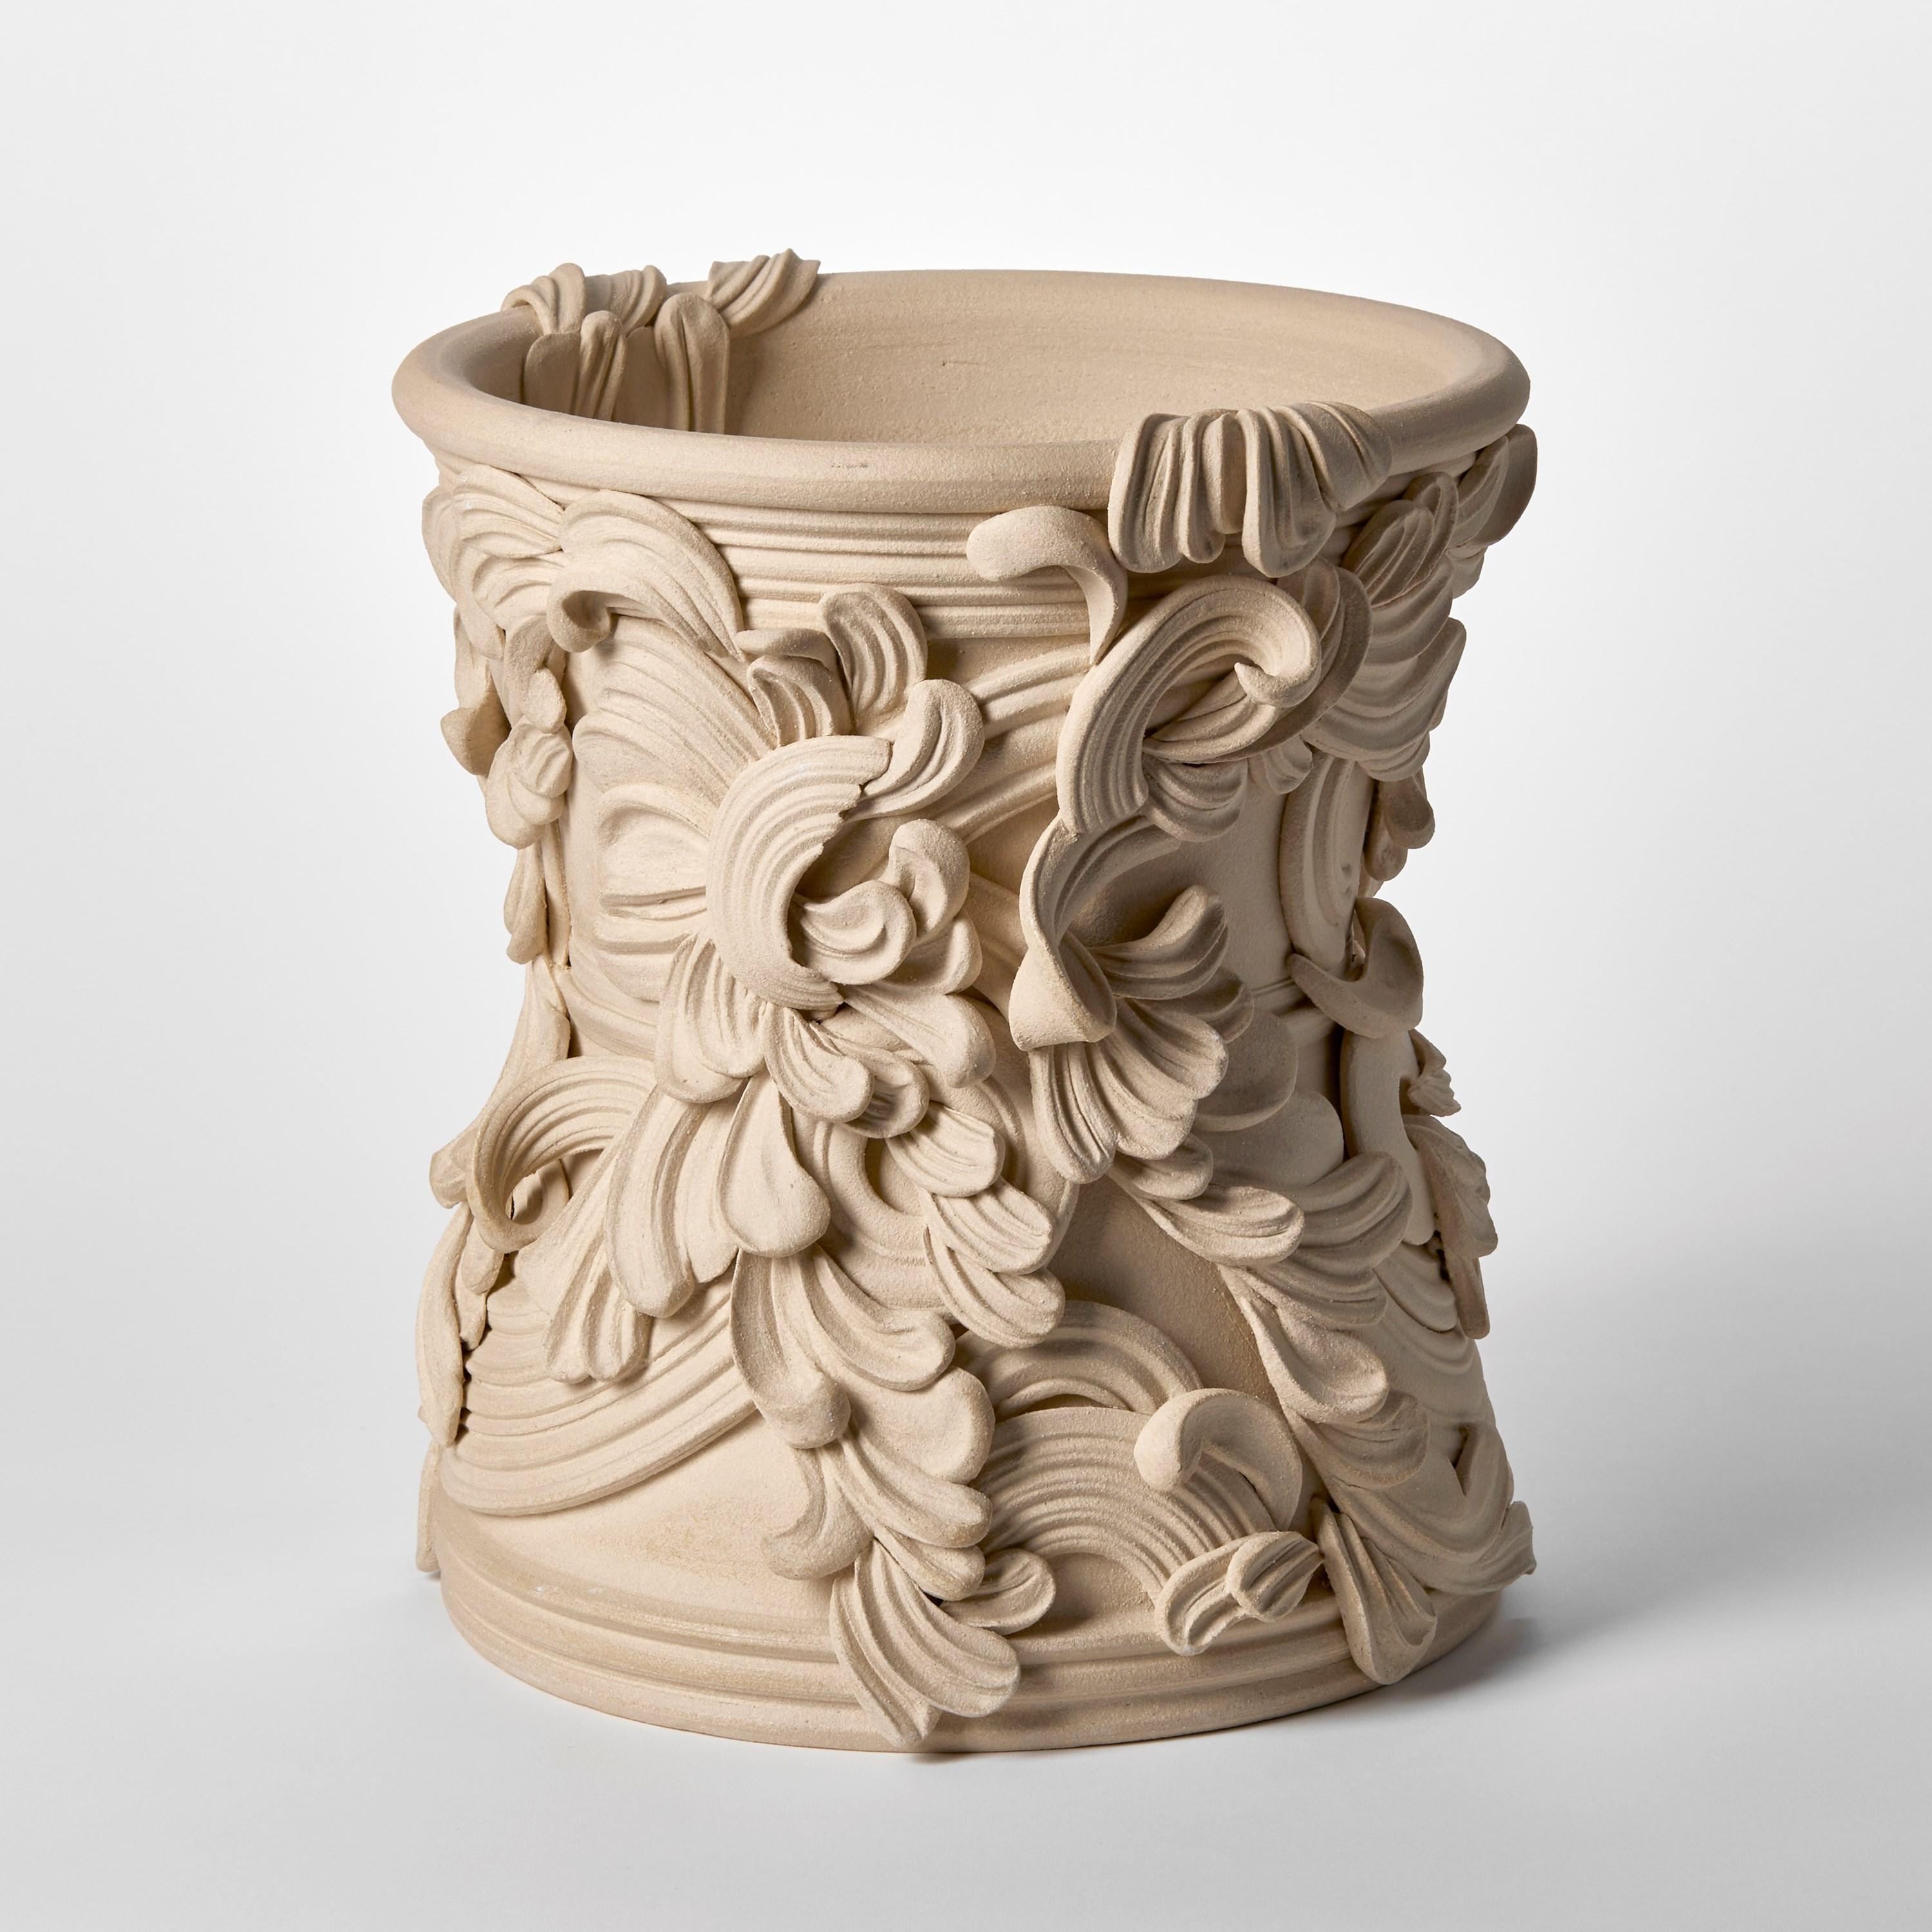 British Gyratory III, a sand coloured ceramic rococo sculptural vessel by Jo Taylor For Sale